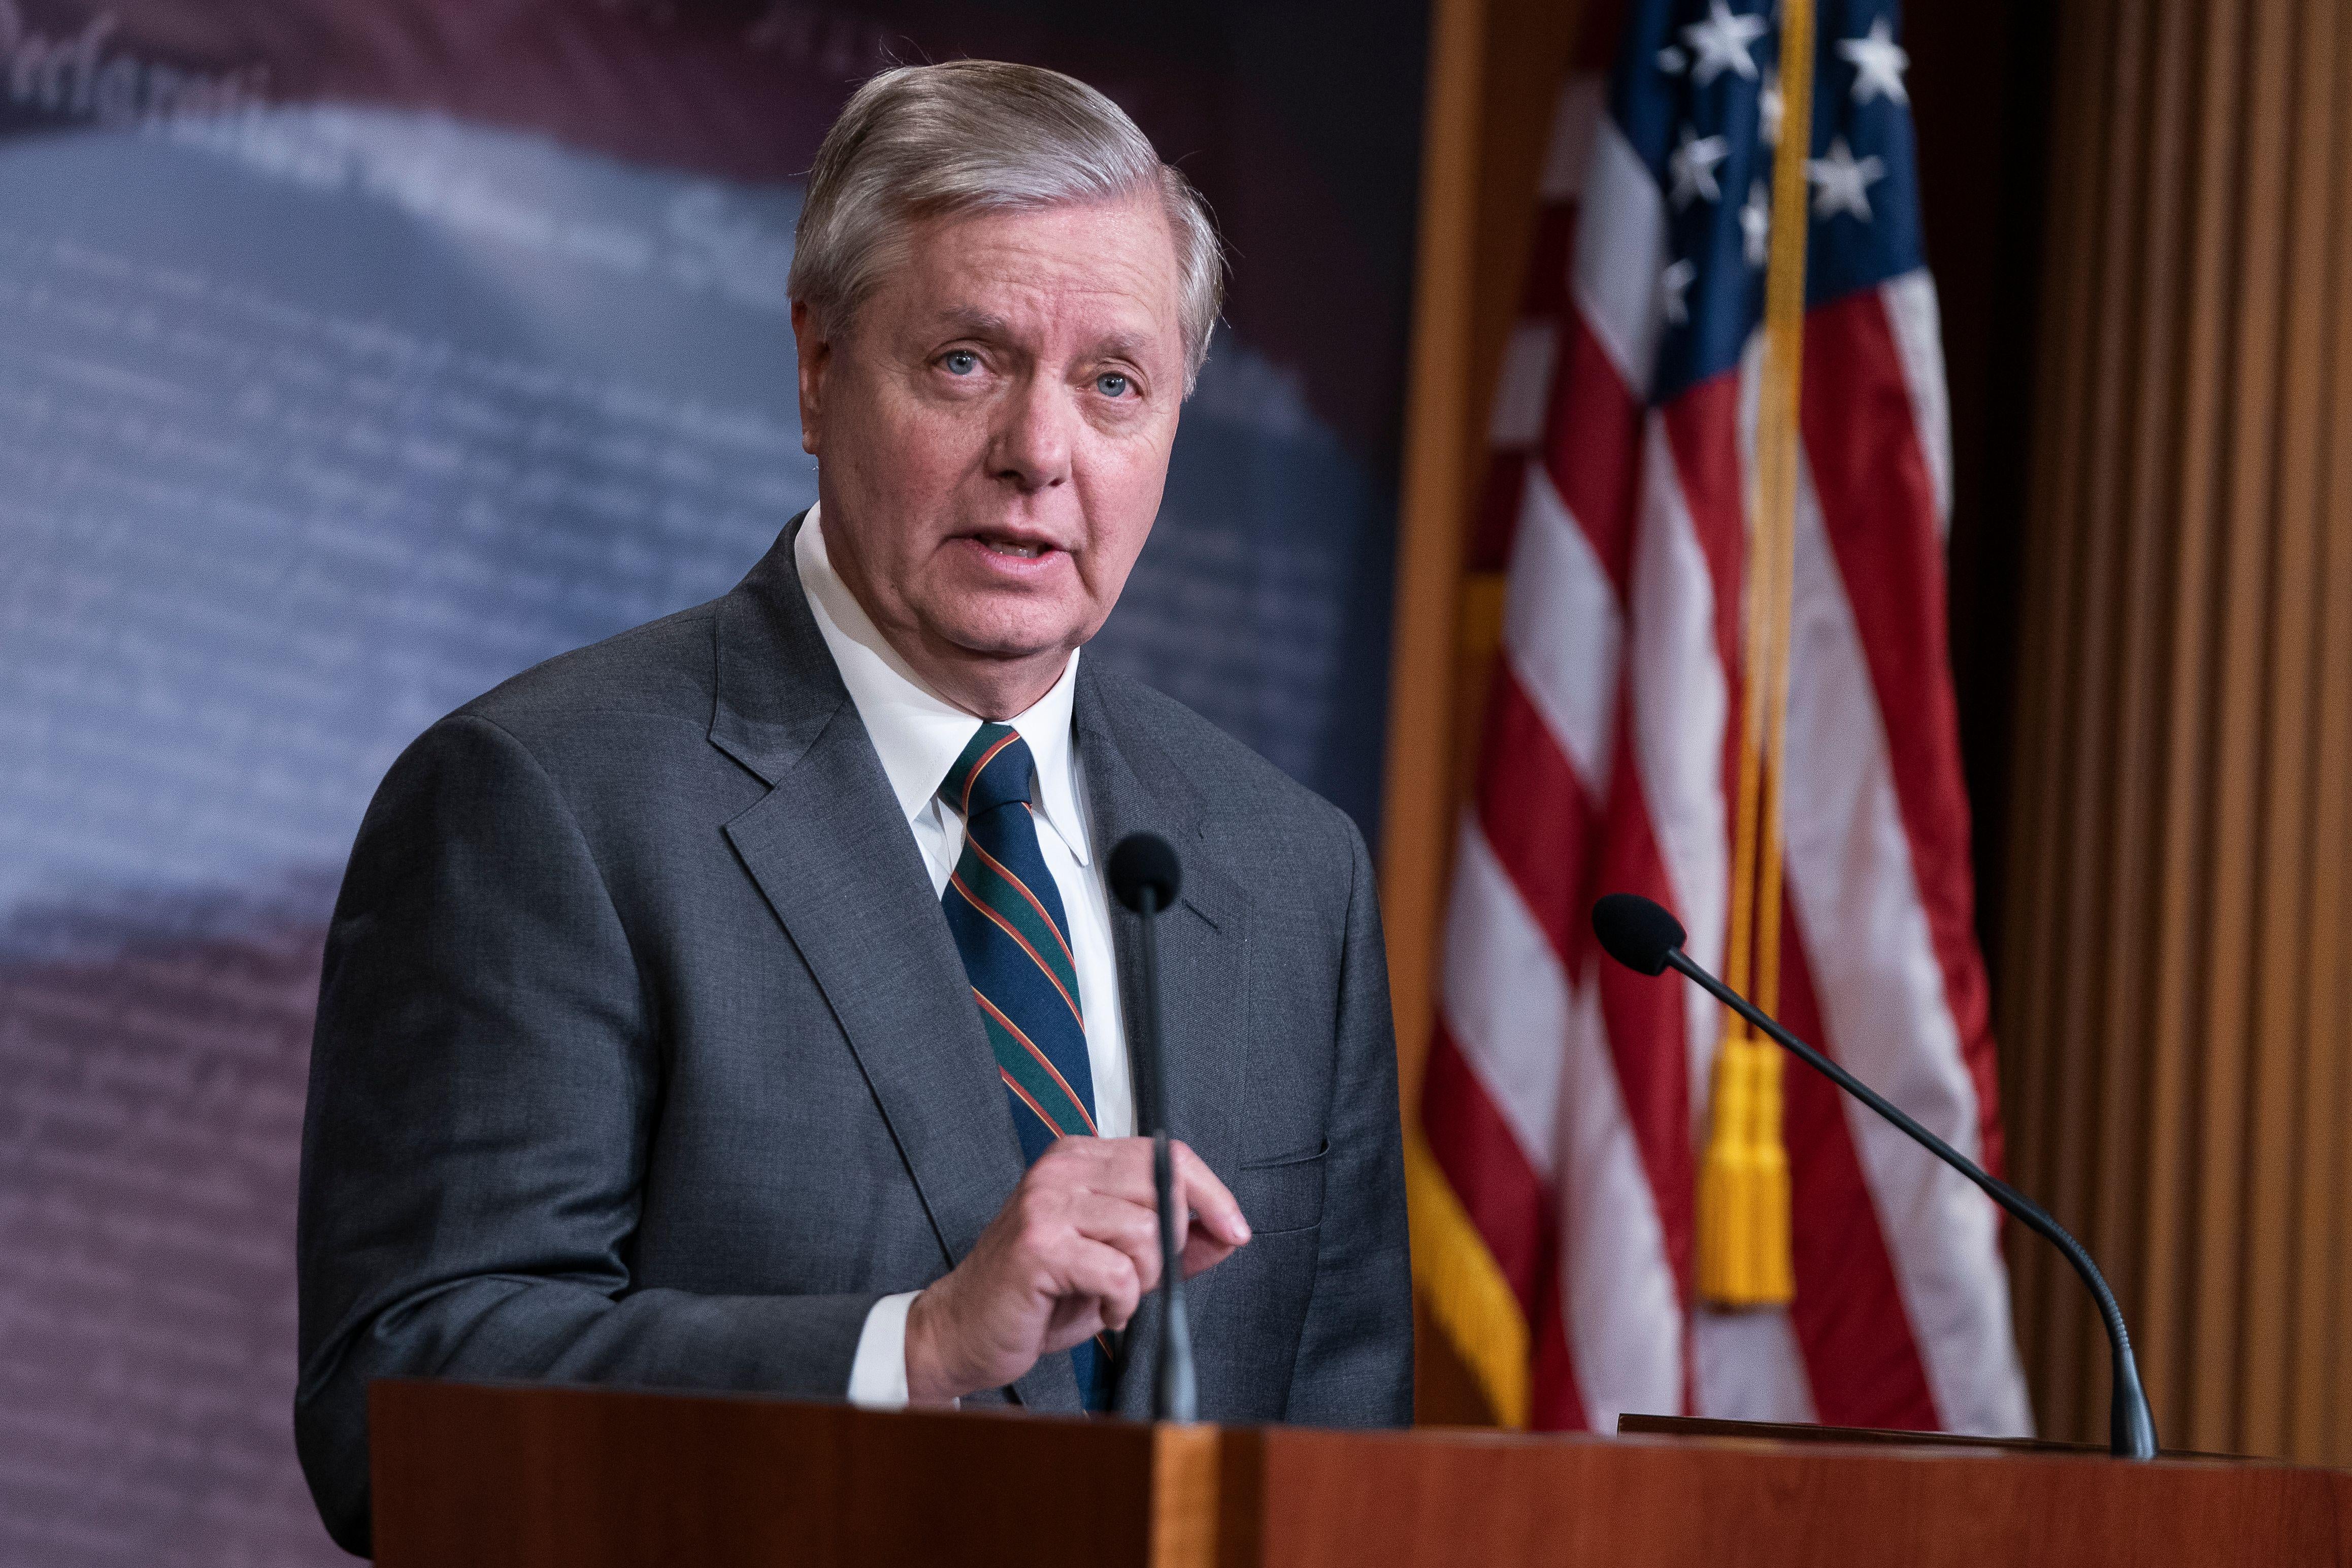 Lindsey Graham speaks at a podium with an American flag in the background